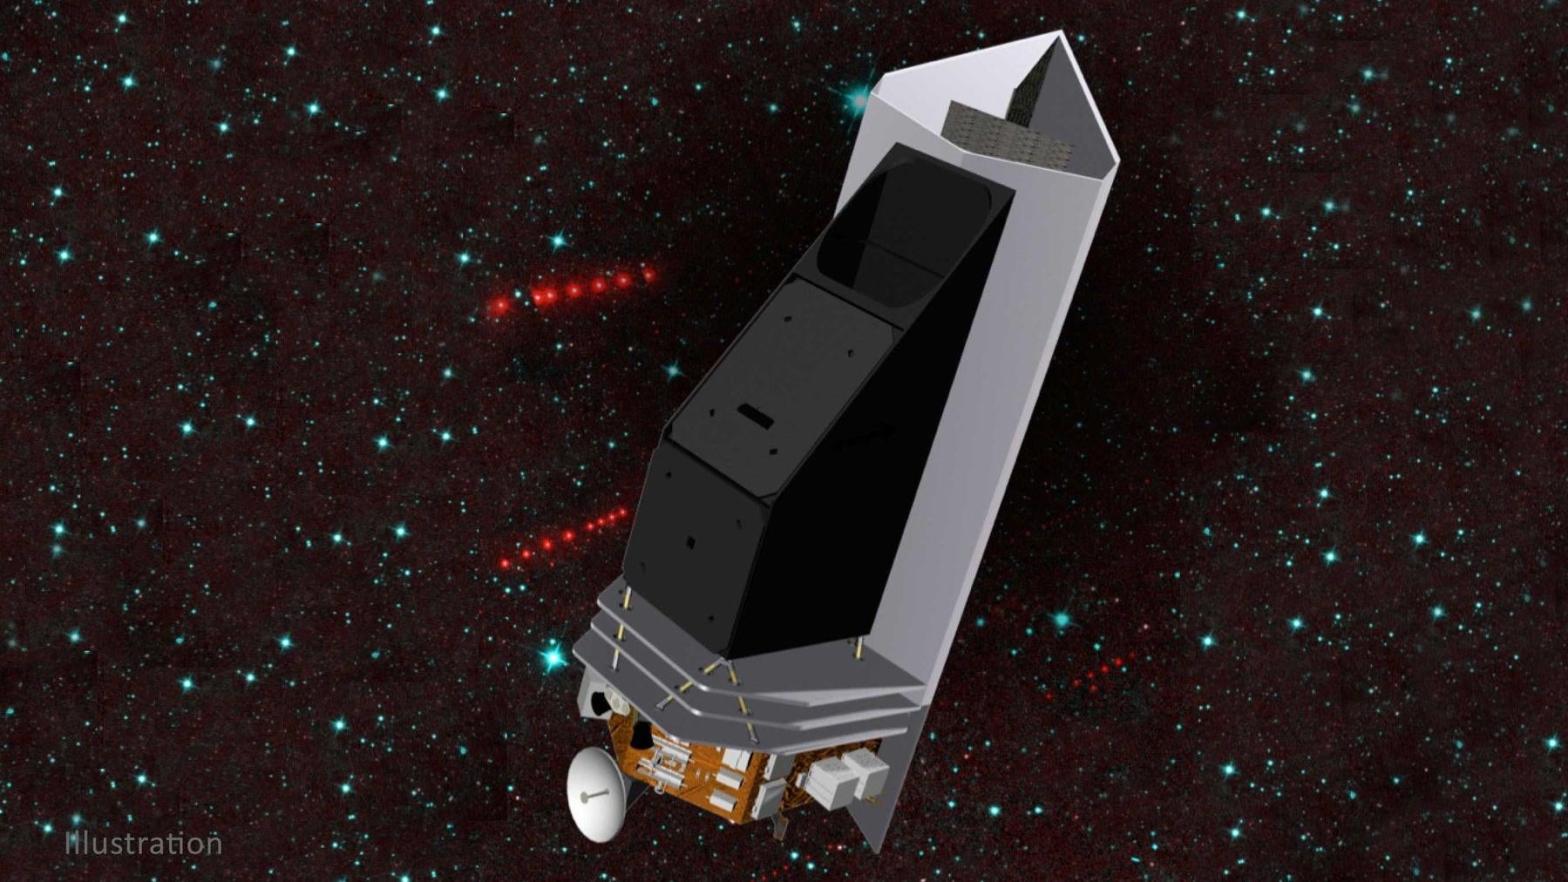 An illustration of the Near Earth Object Surveyor, which is scheduled for launch in June 2028. (Illustration: NASA/JPL-Caltech)